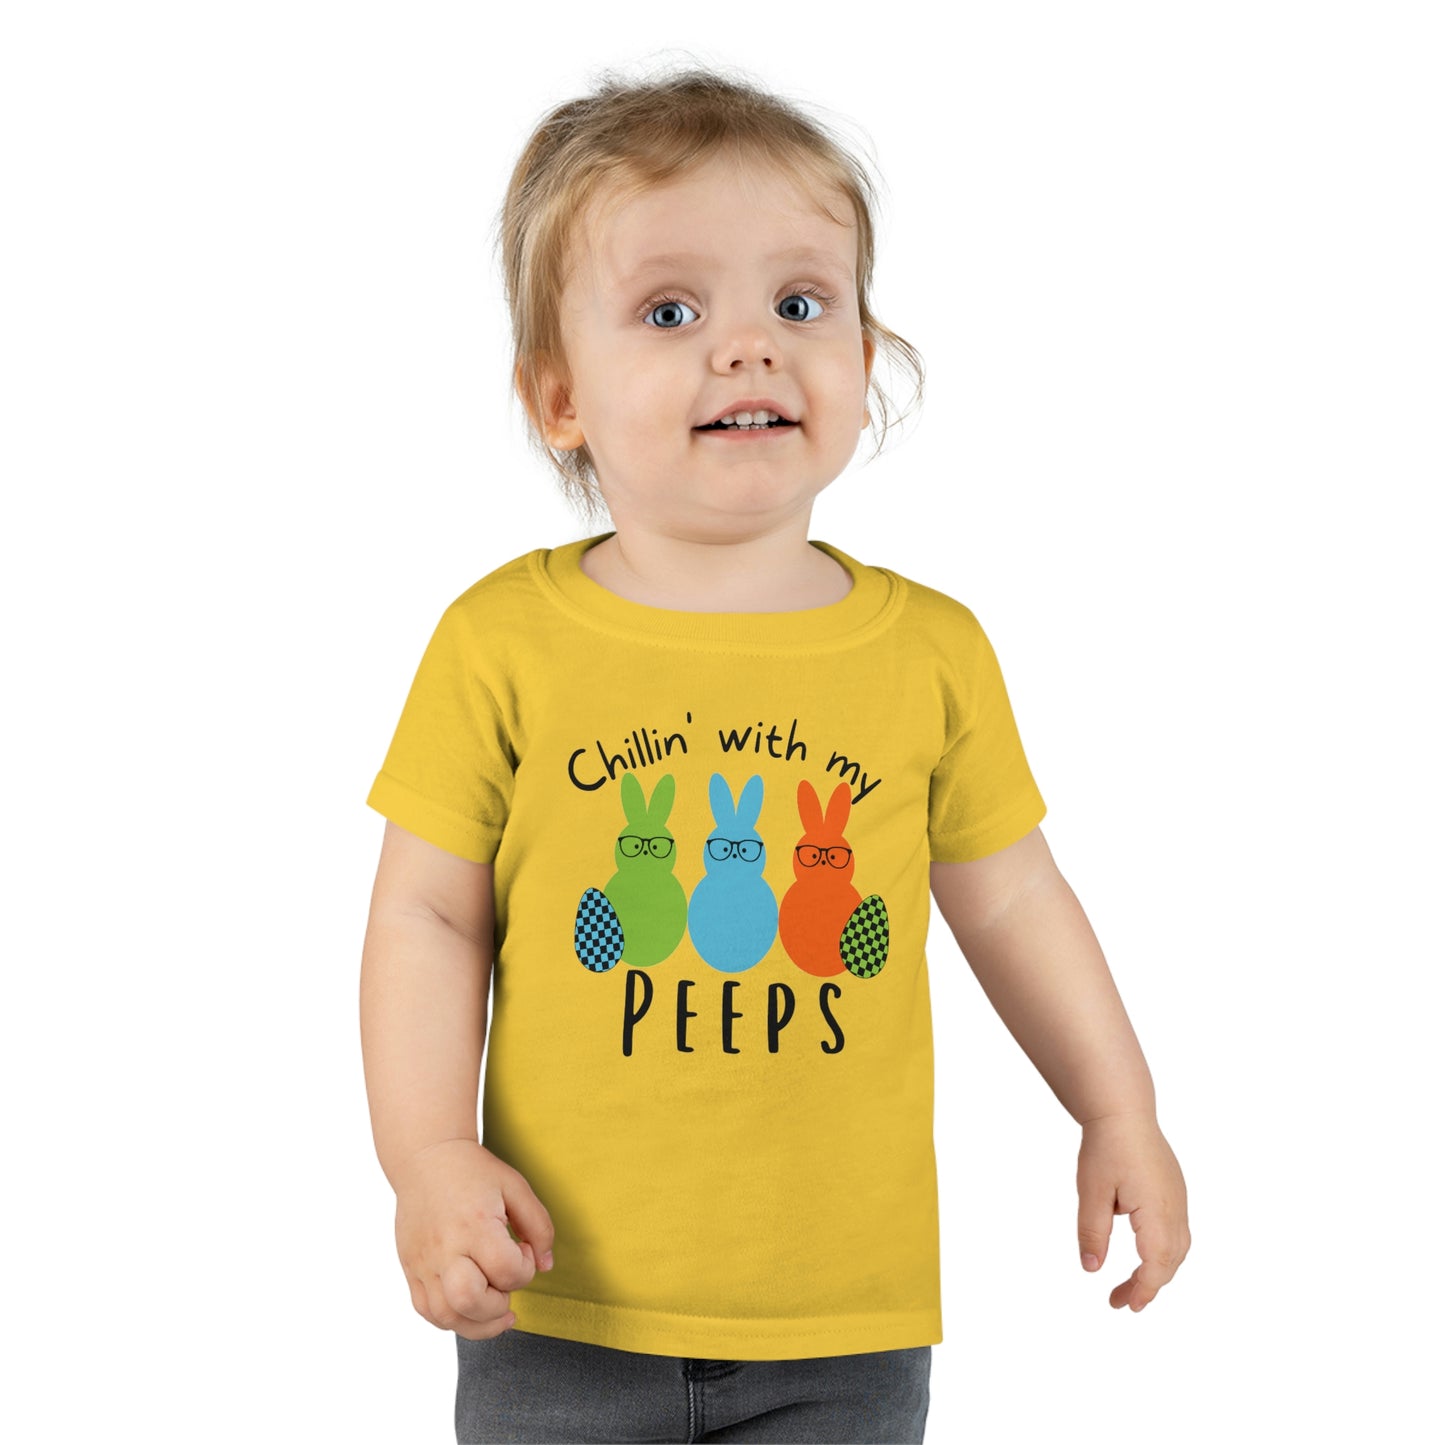 "Chillin' with my Peeps" Toddler Tee